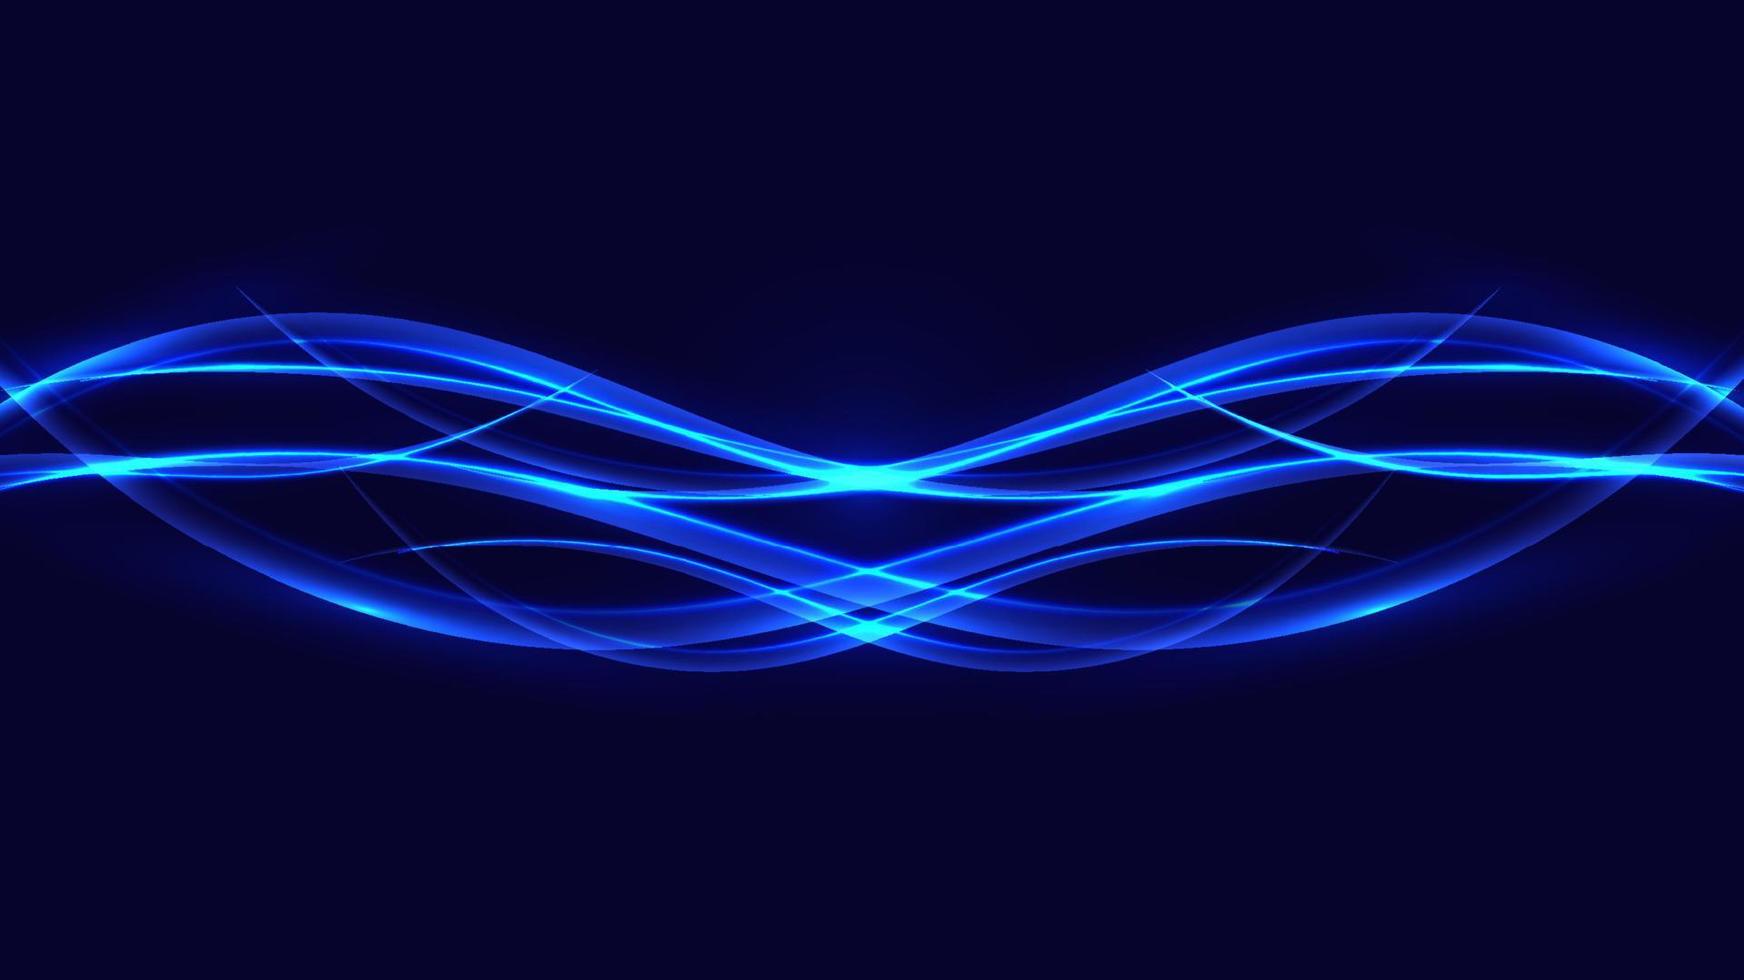 Abstract blue neon shiny glowing wave moving lines with lighting effect design elements on dark background vector